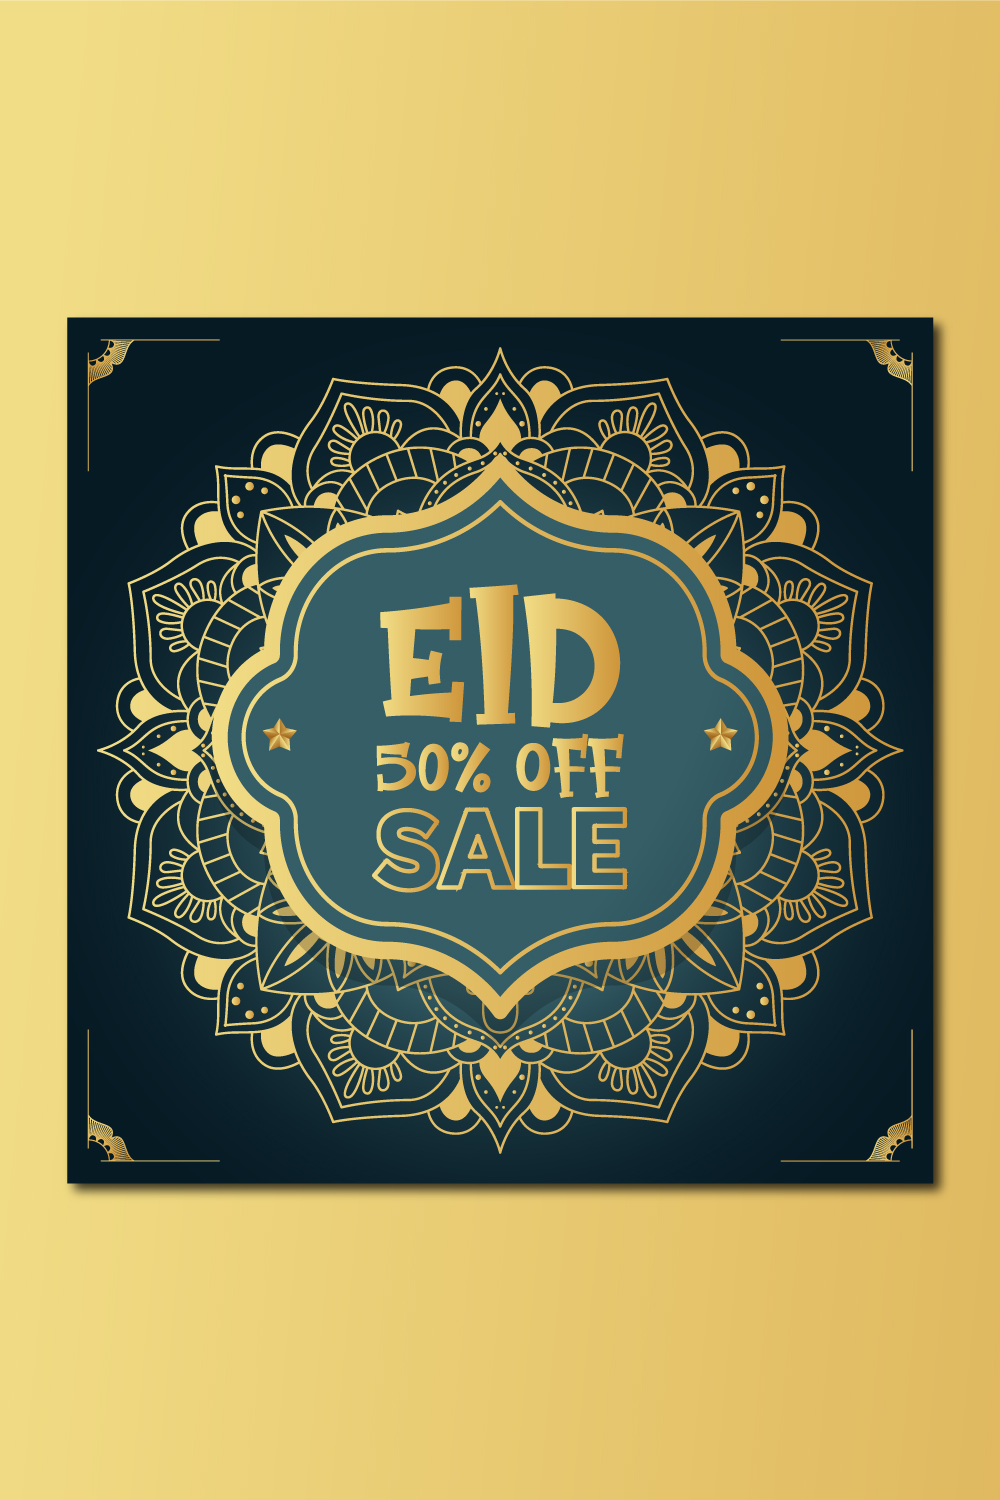 eid mubarak creative sale and discount banner or tag design pinterest preview image.